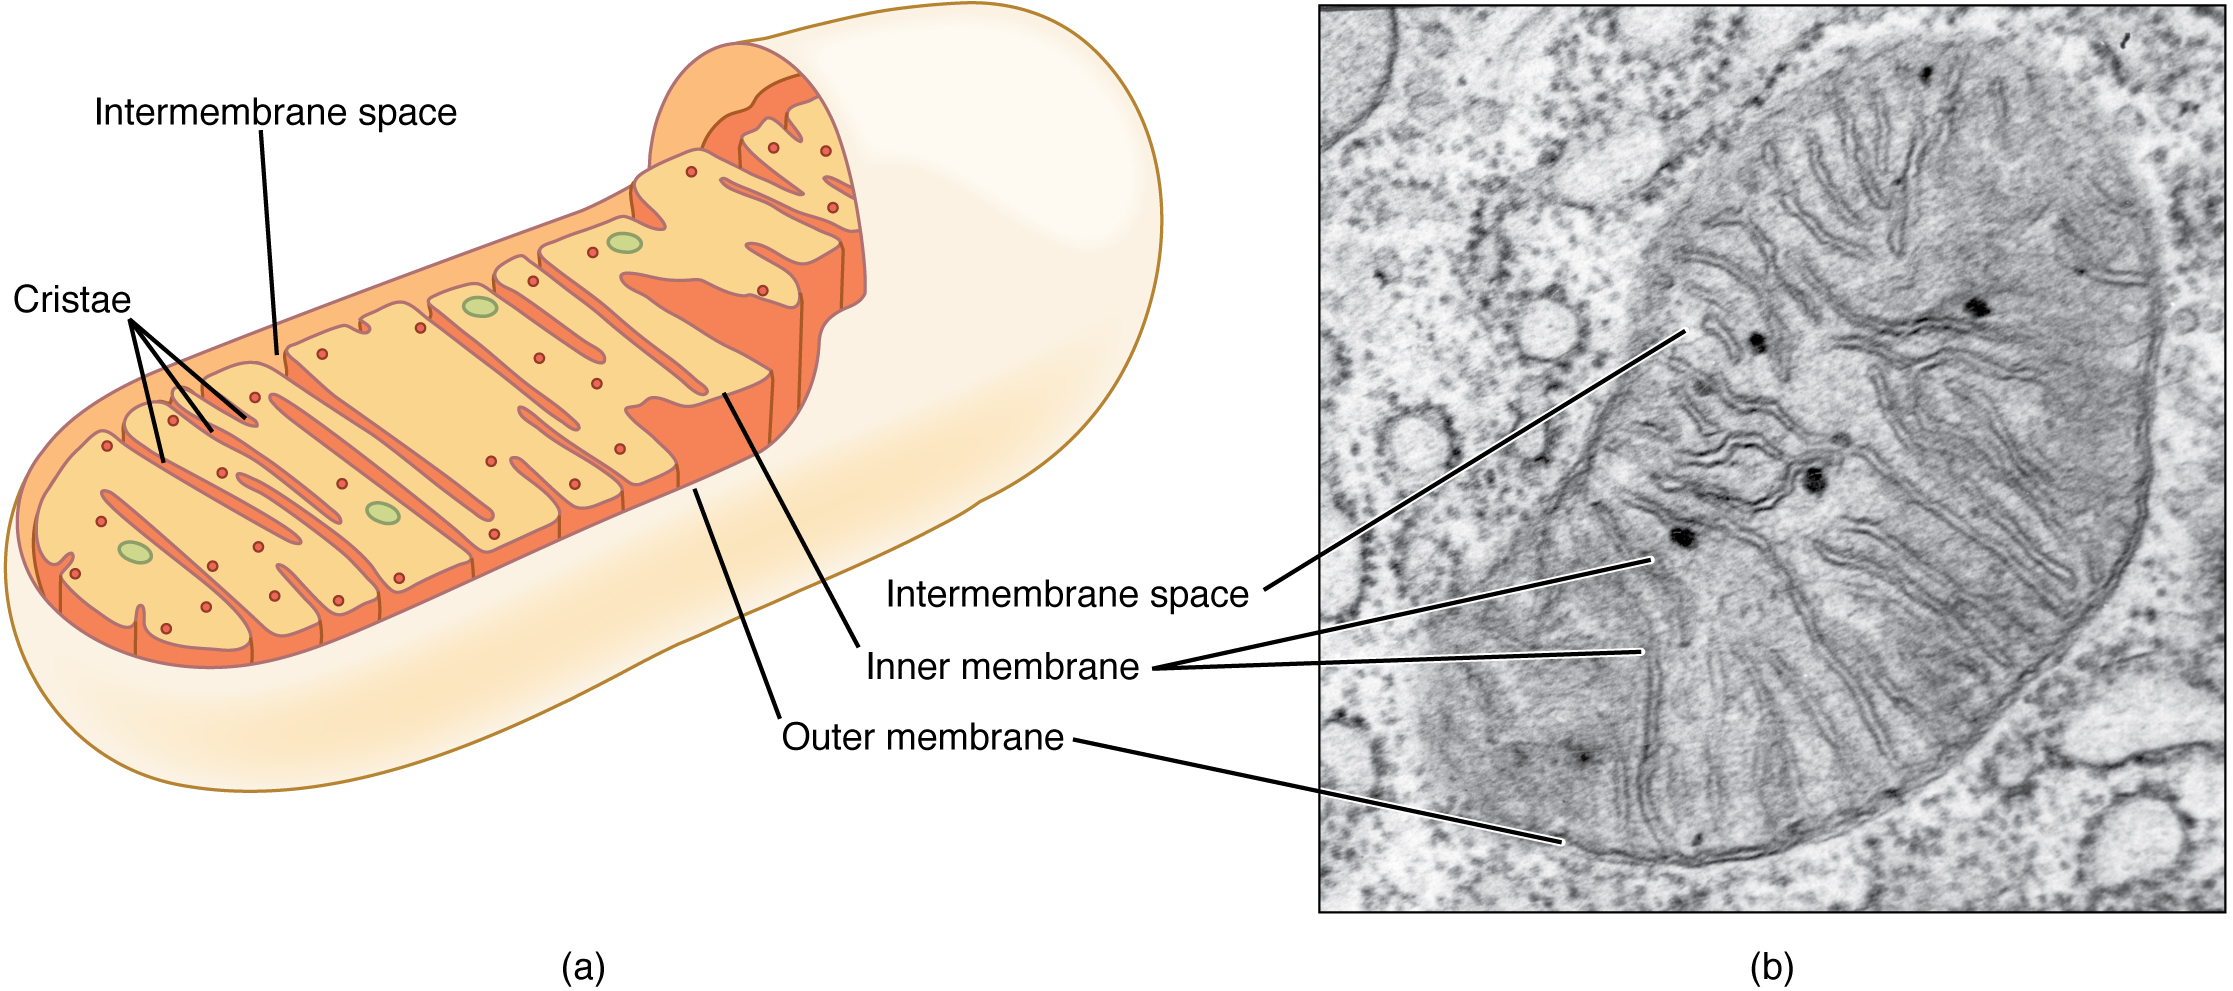 This figure shows the structure of a mitochondrion. The inner and outer membrane, the cristae and the intermembrane space are labeled. The right panel shows a micrograph with the structure of a mitochondrion in detail.